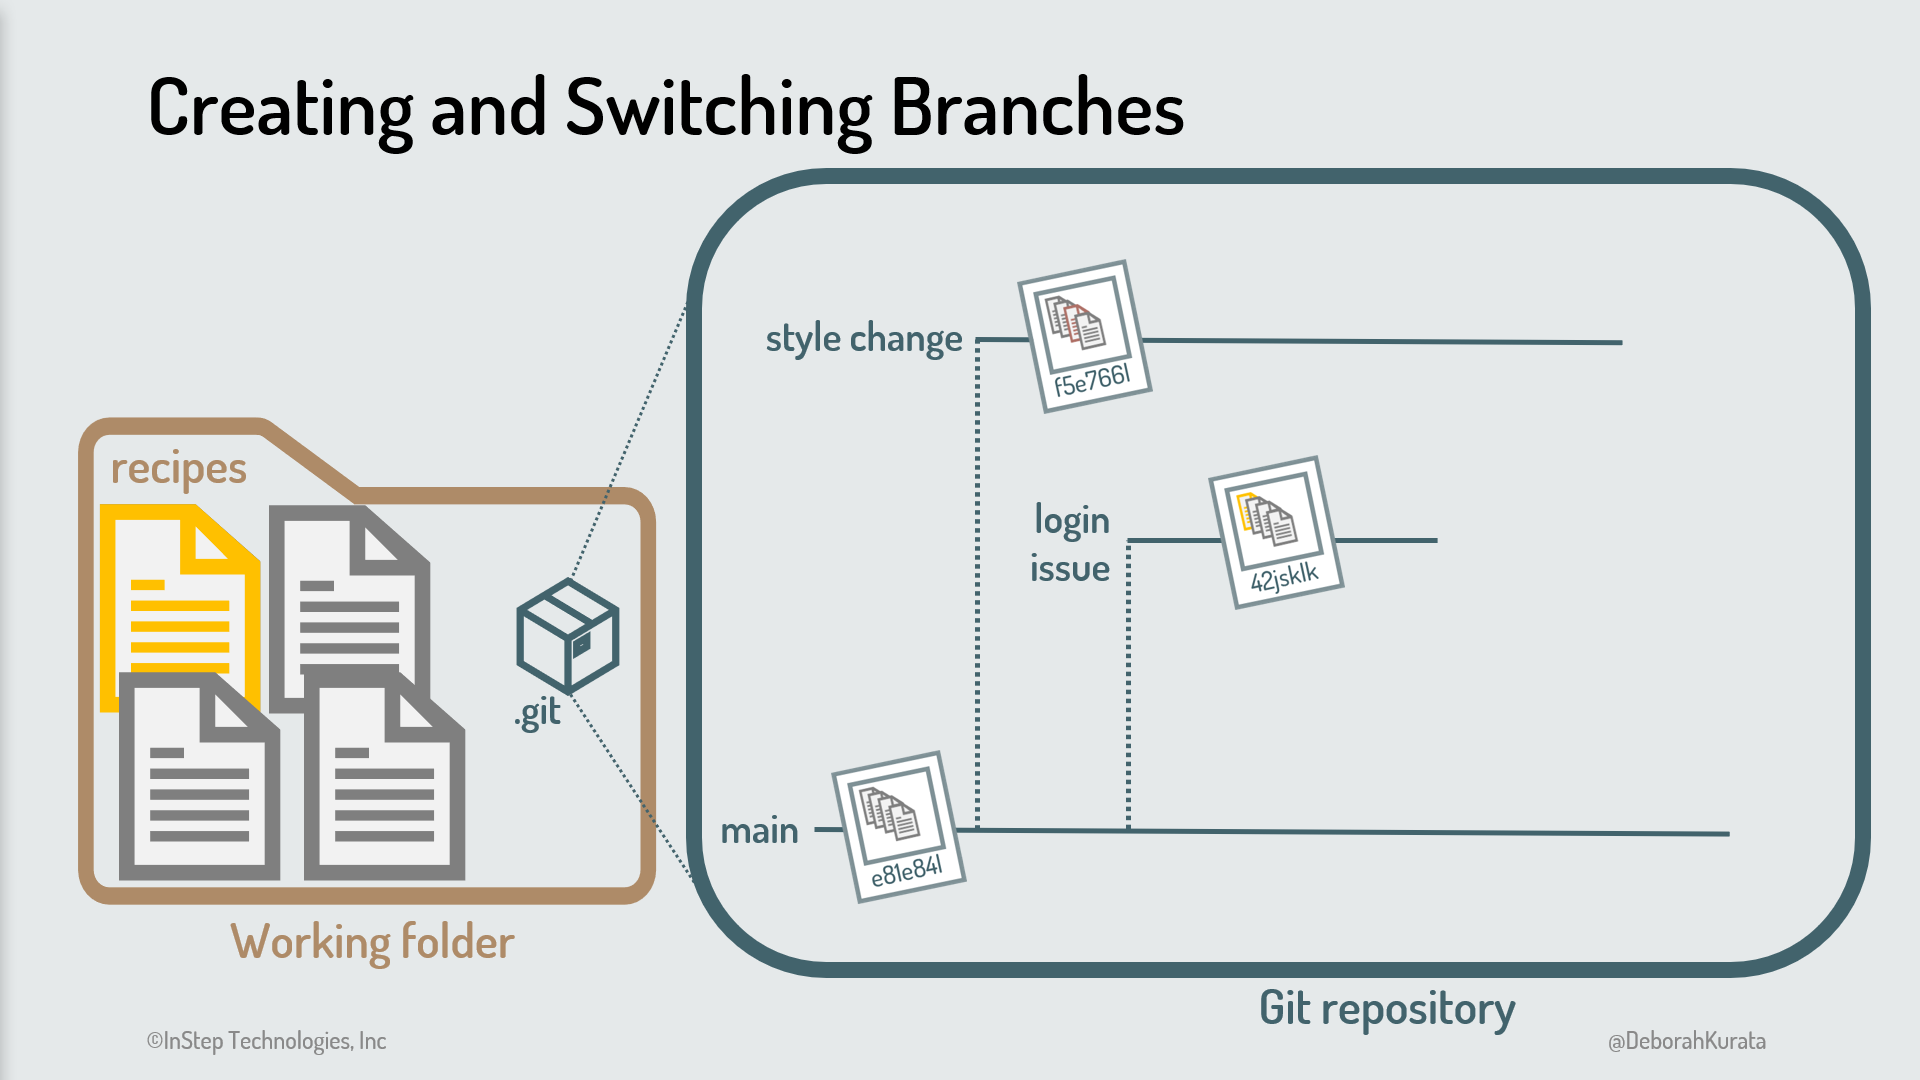 Working folder on the left. Git repository on the right with the "login issue" branch